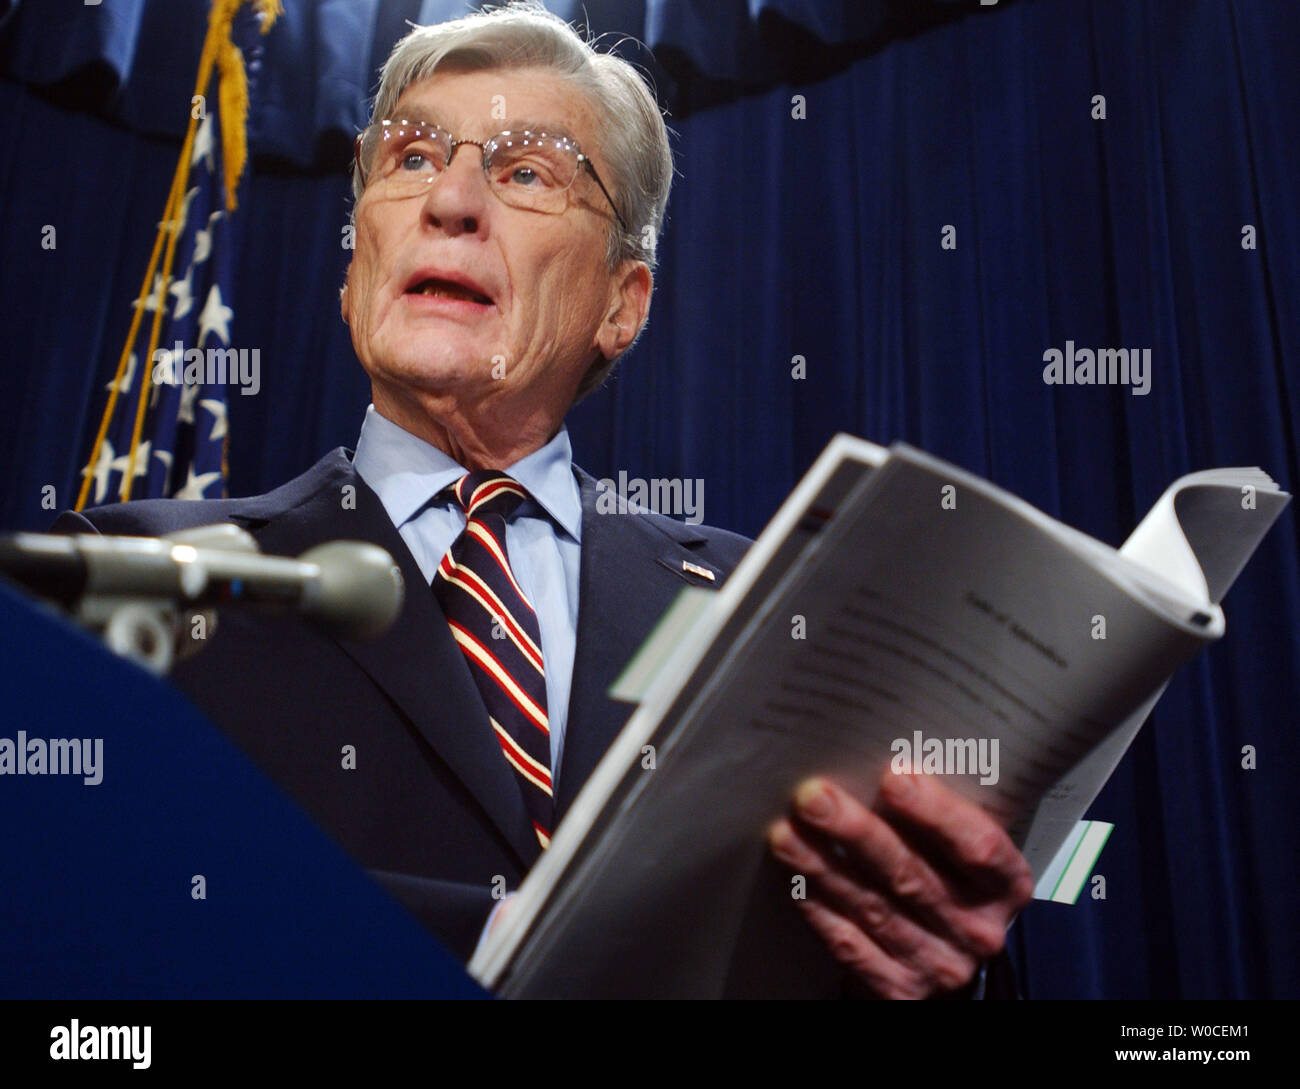 Sen. John Warner, R-VA, speaks to members of the press during a news conference on August 25, 2004 in Washington.  Warner called the news conference to discuss the prisoner abuse at Abu Ghraib Prison and the Jones-Fay Report. (UPI Photo/Michael Kleinfeld) Stock Photo